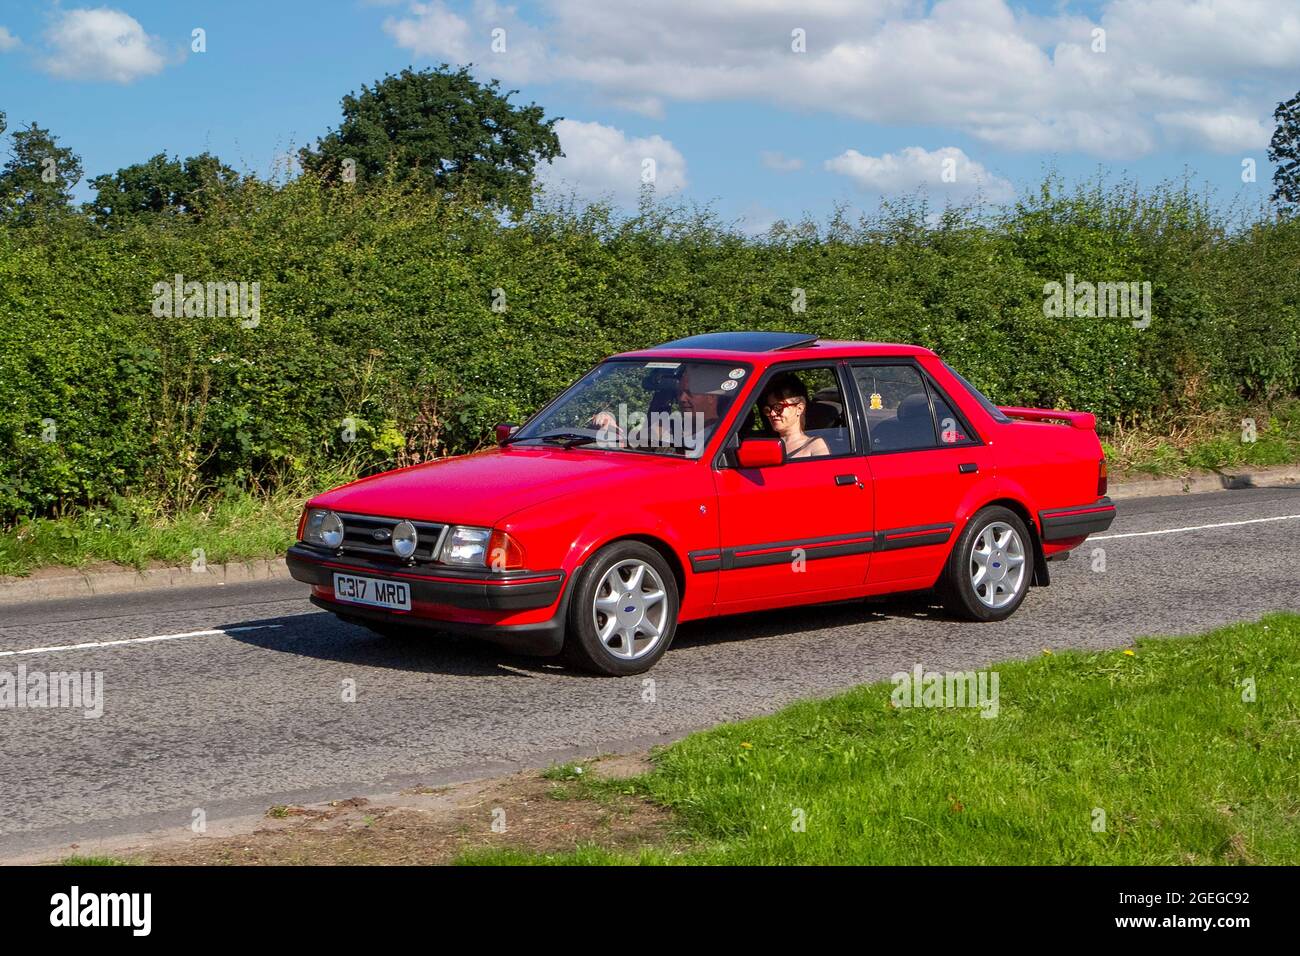 A front view of a RED 1980s 80s FORD ORION vintage classic car retro driver vehicle automobile Stock Photo